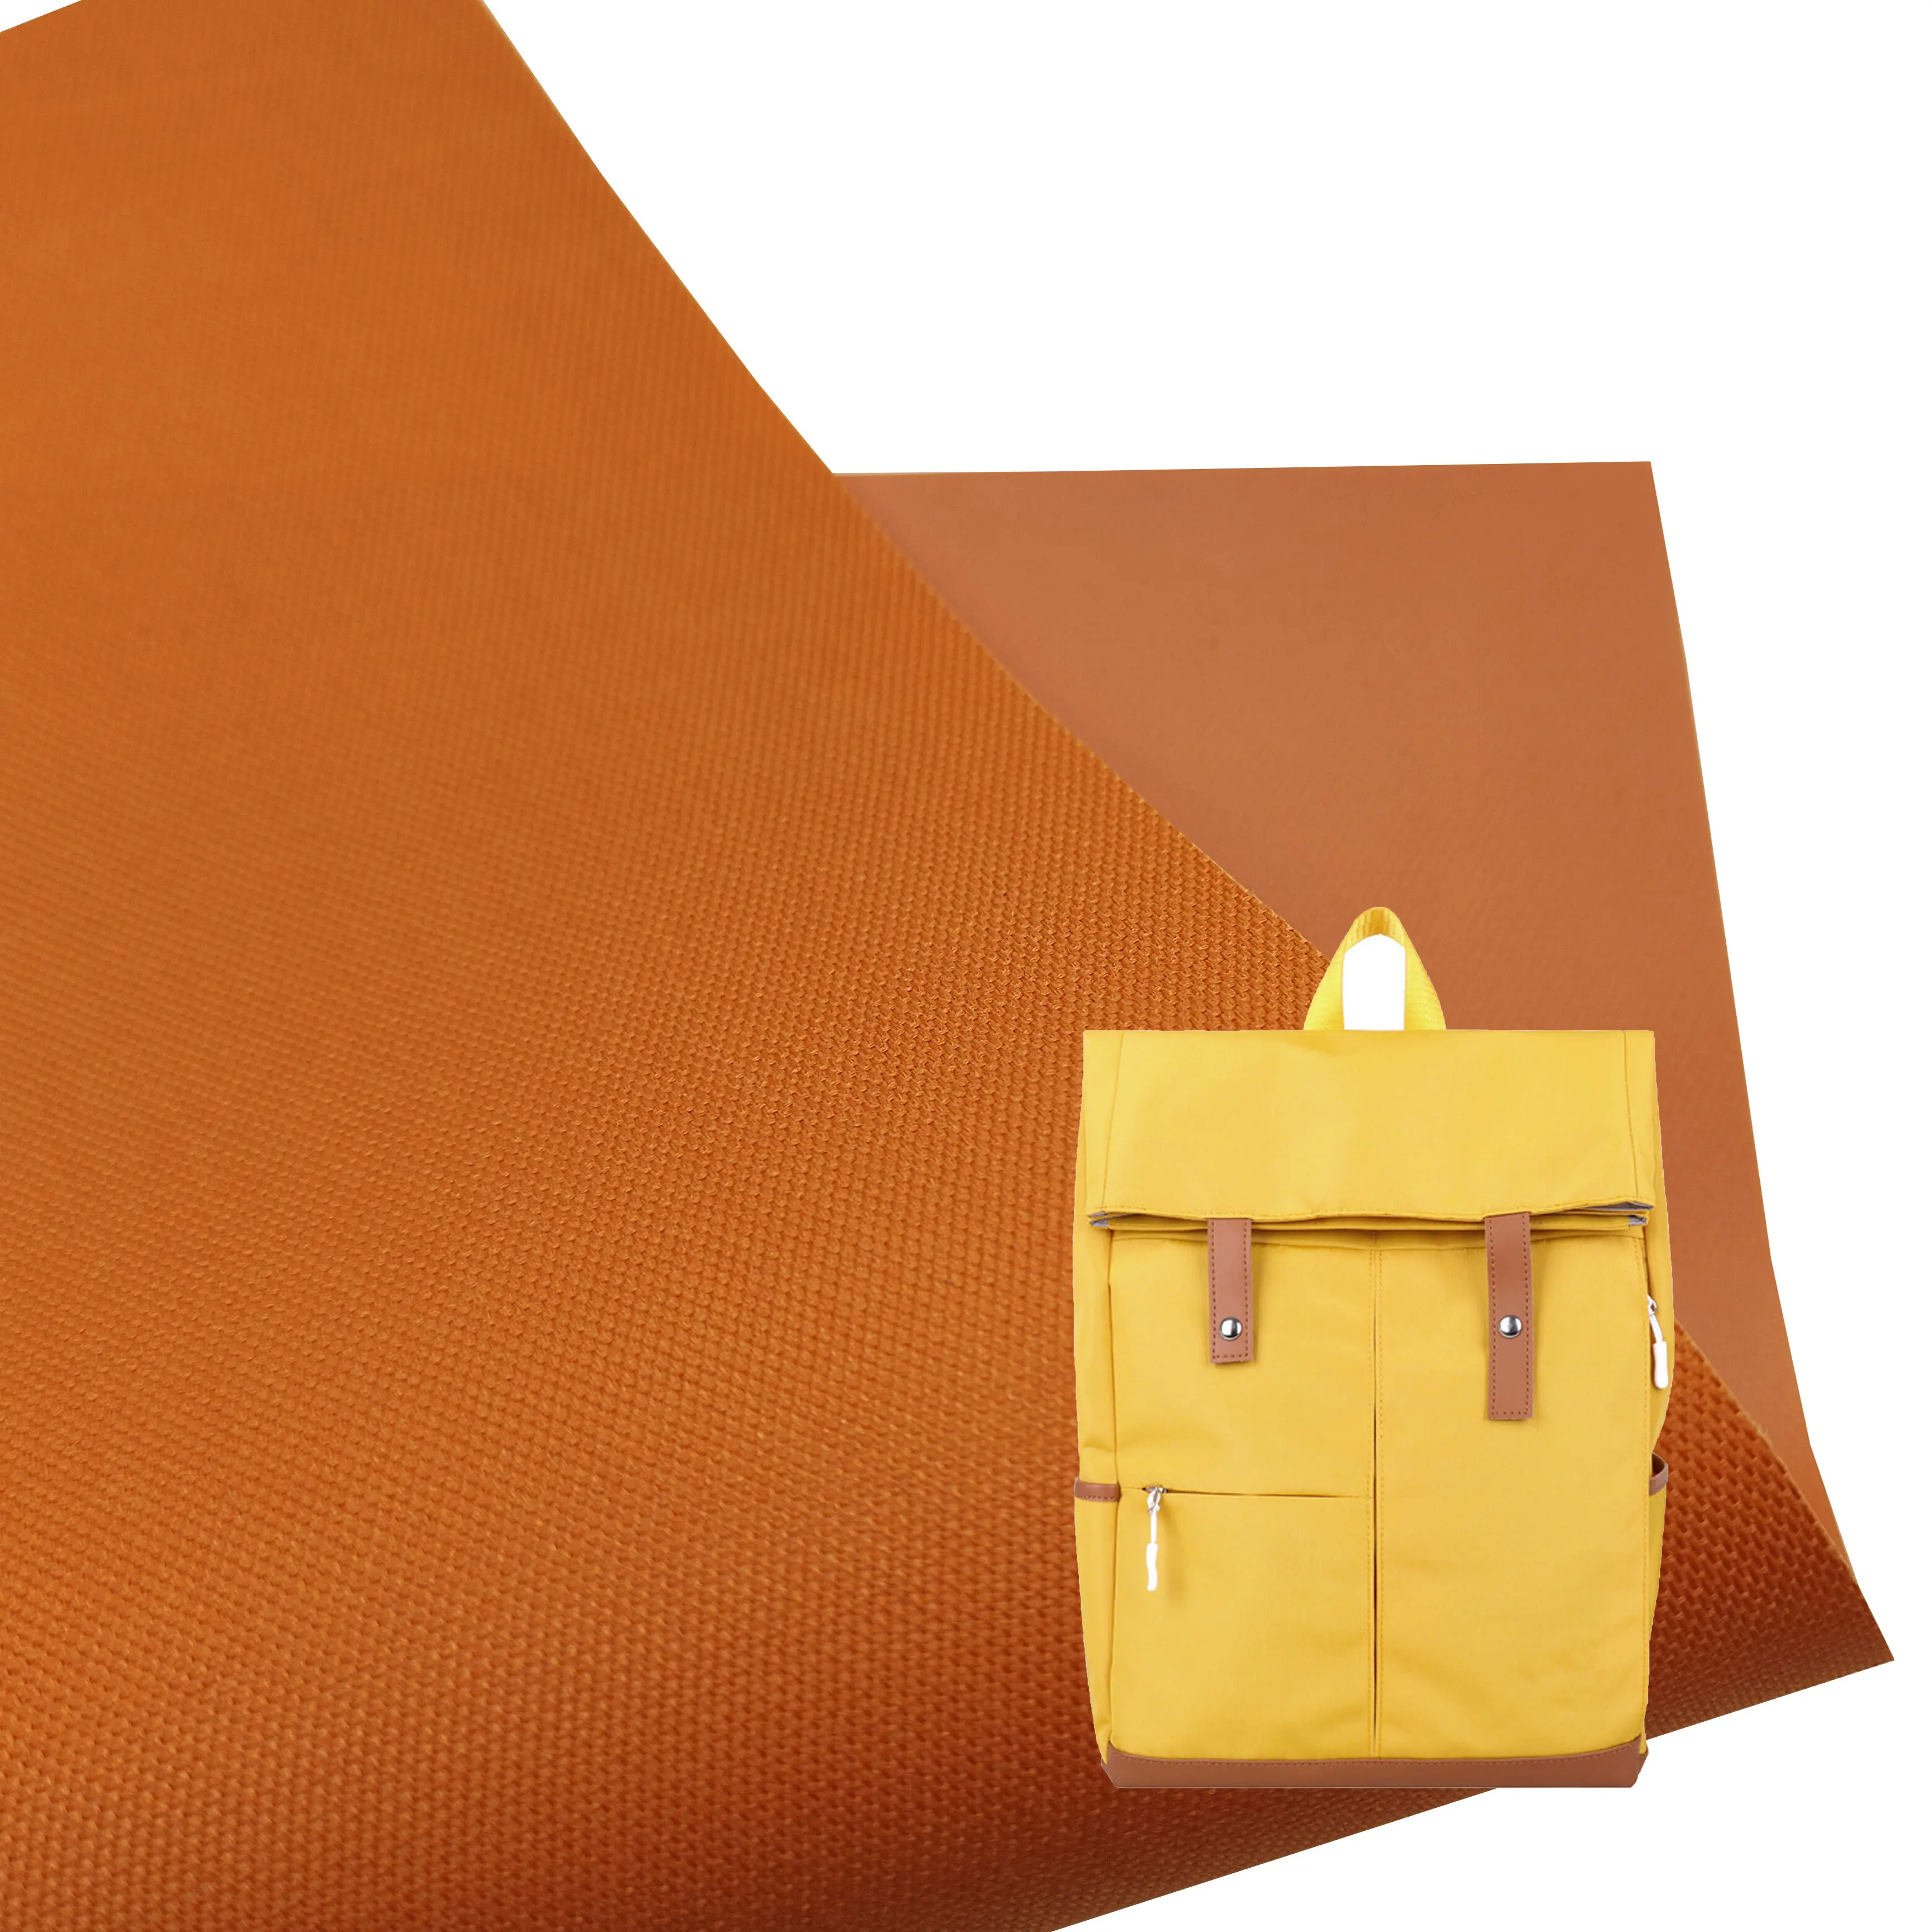 Customized 300D polyester Oxford cloth PVC coated bags from Chinese factories at low prices